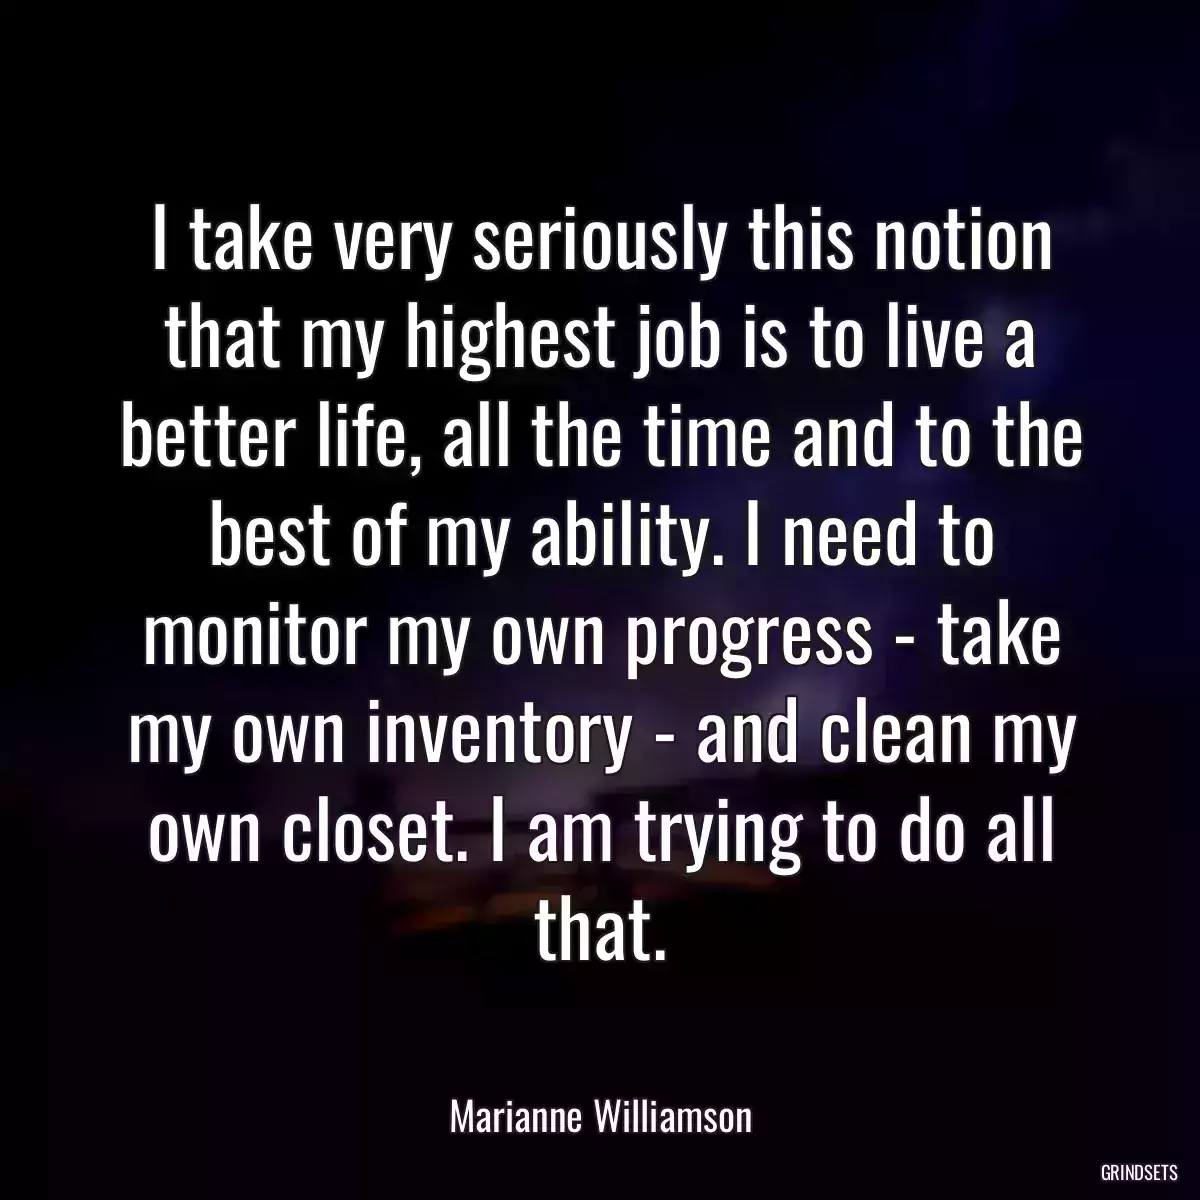 I take very seriously this notion that my highest job is to live a better life, all the time and to the best of my ability. I need to monitor my own progress - take my own inventory - and clean my own closet. I am trying to do all that.